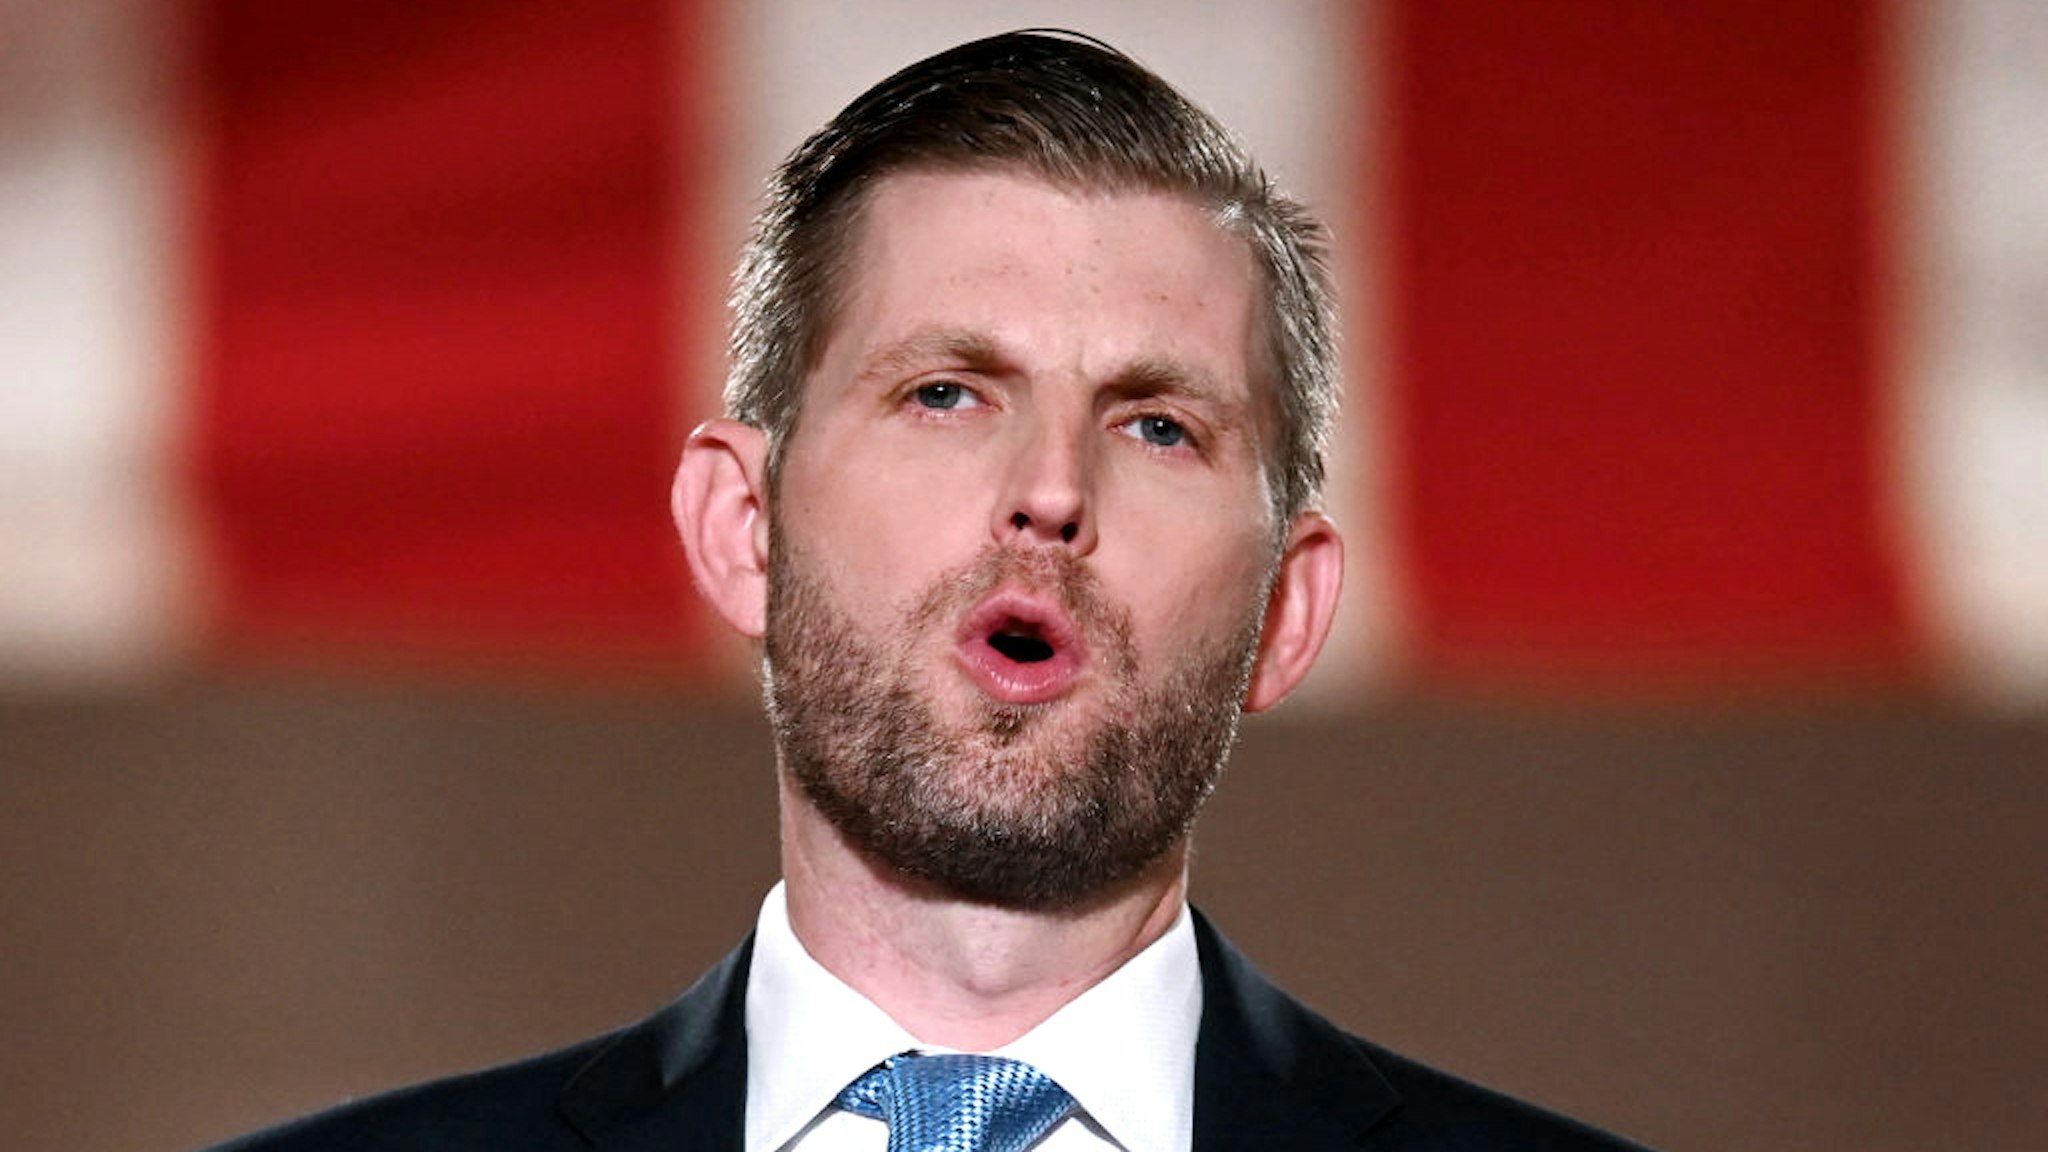 Eric Trump delivers a pre-recorded speech at the Andrew W. Mellon Auditorium in Washington, DC, on August 25, 2020, on the second day of the Republican National Convention.